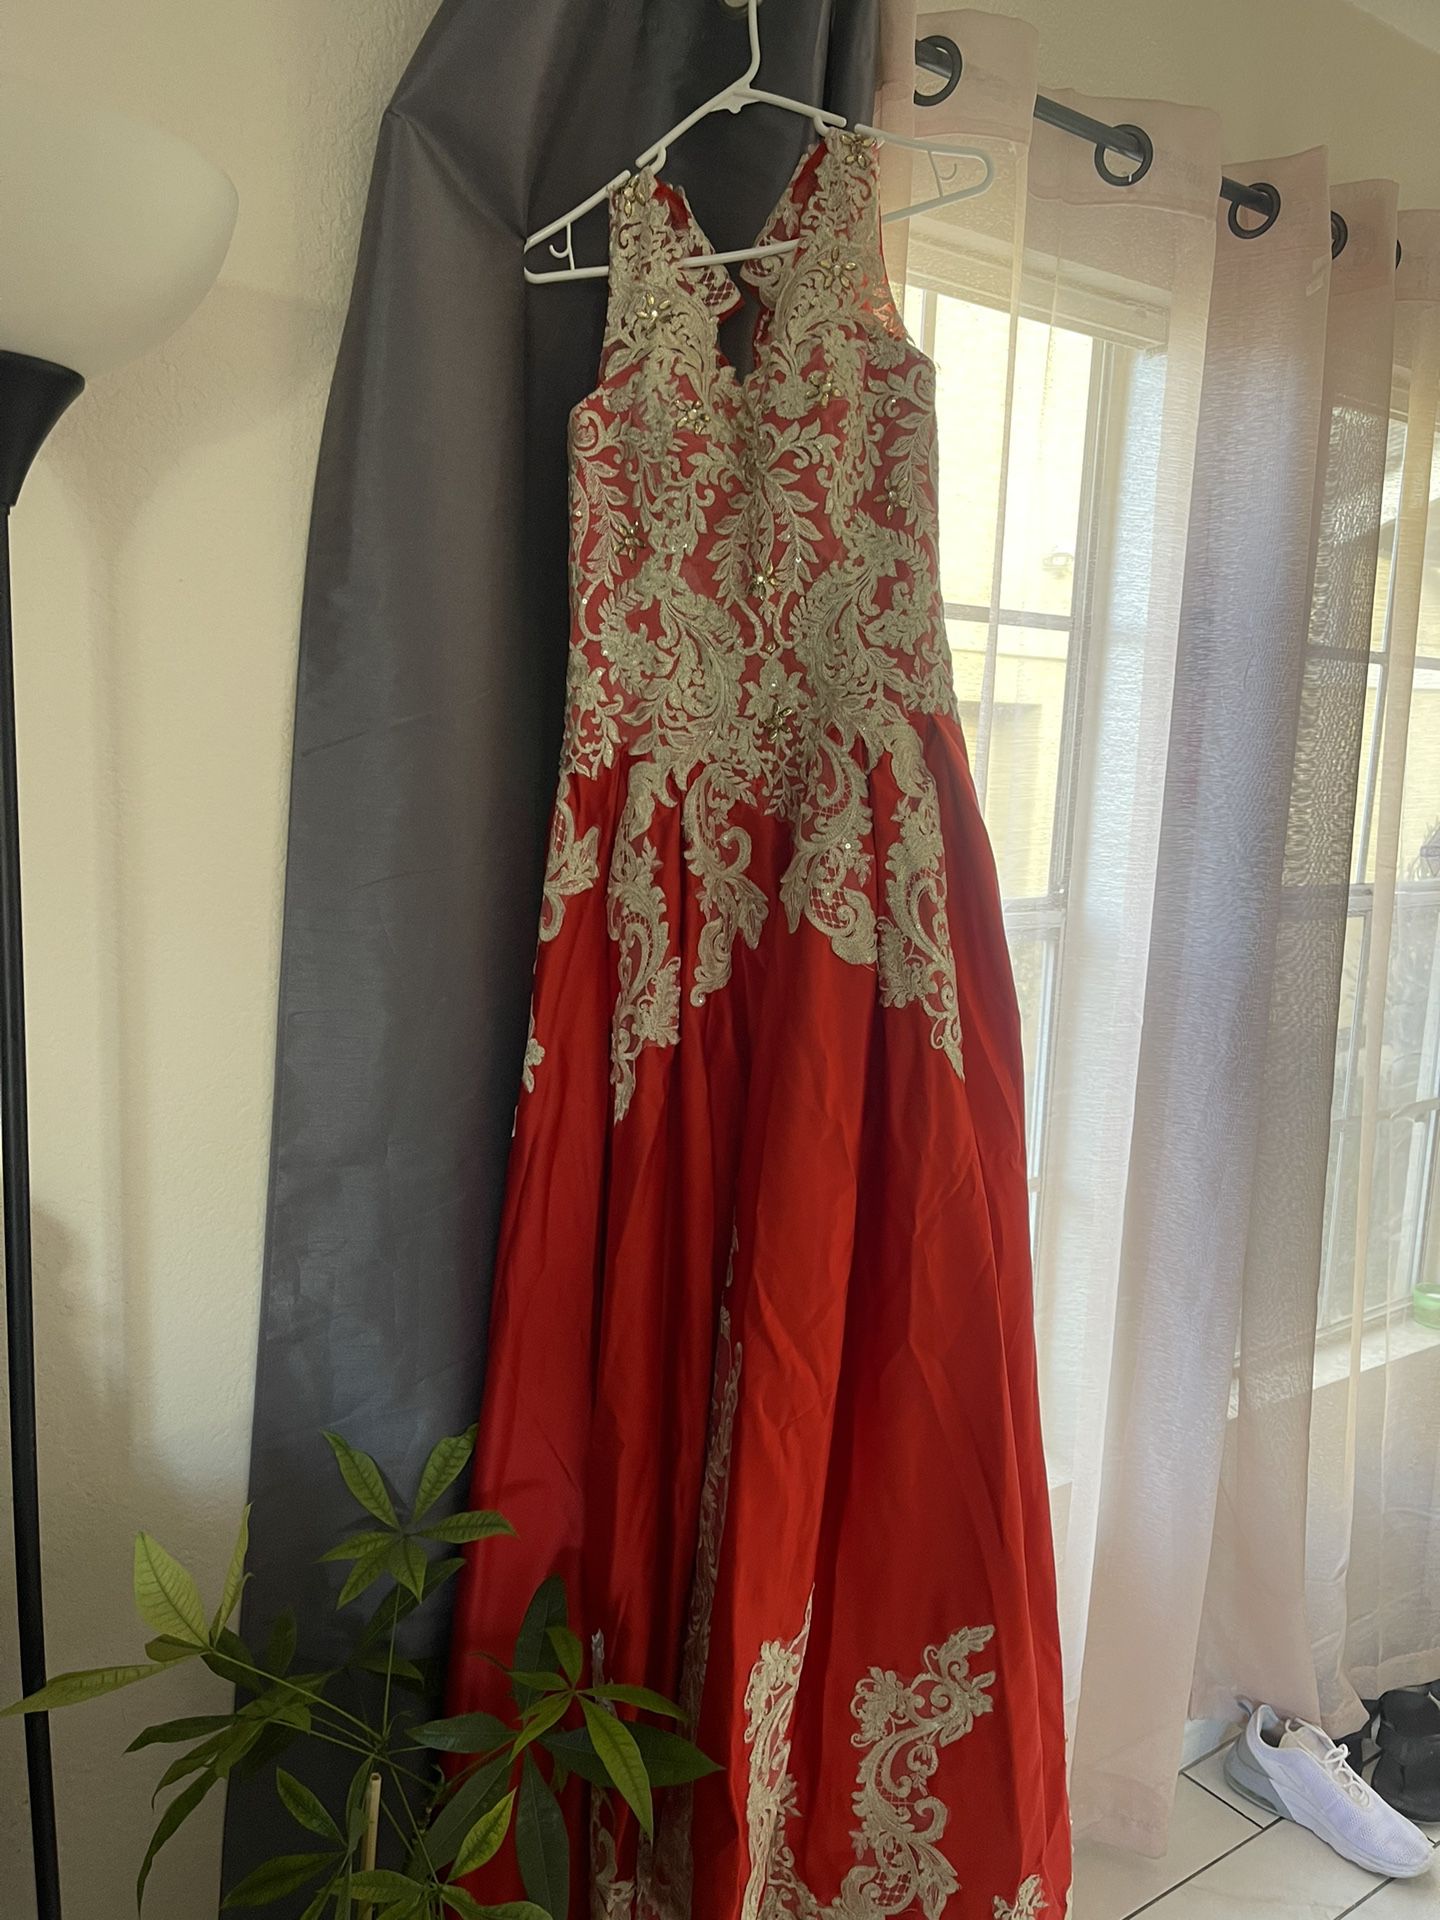 New Beautiful Red Party Dress Size Large Asking $75!!